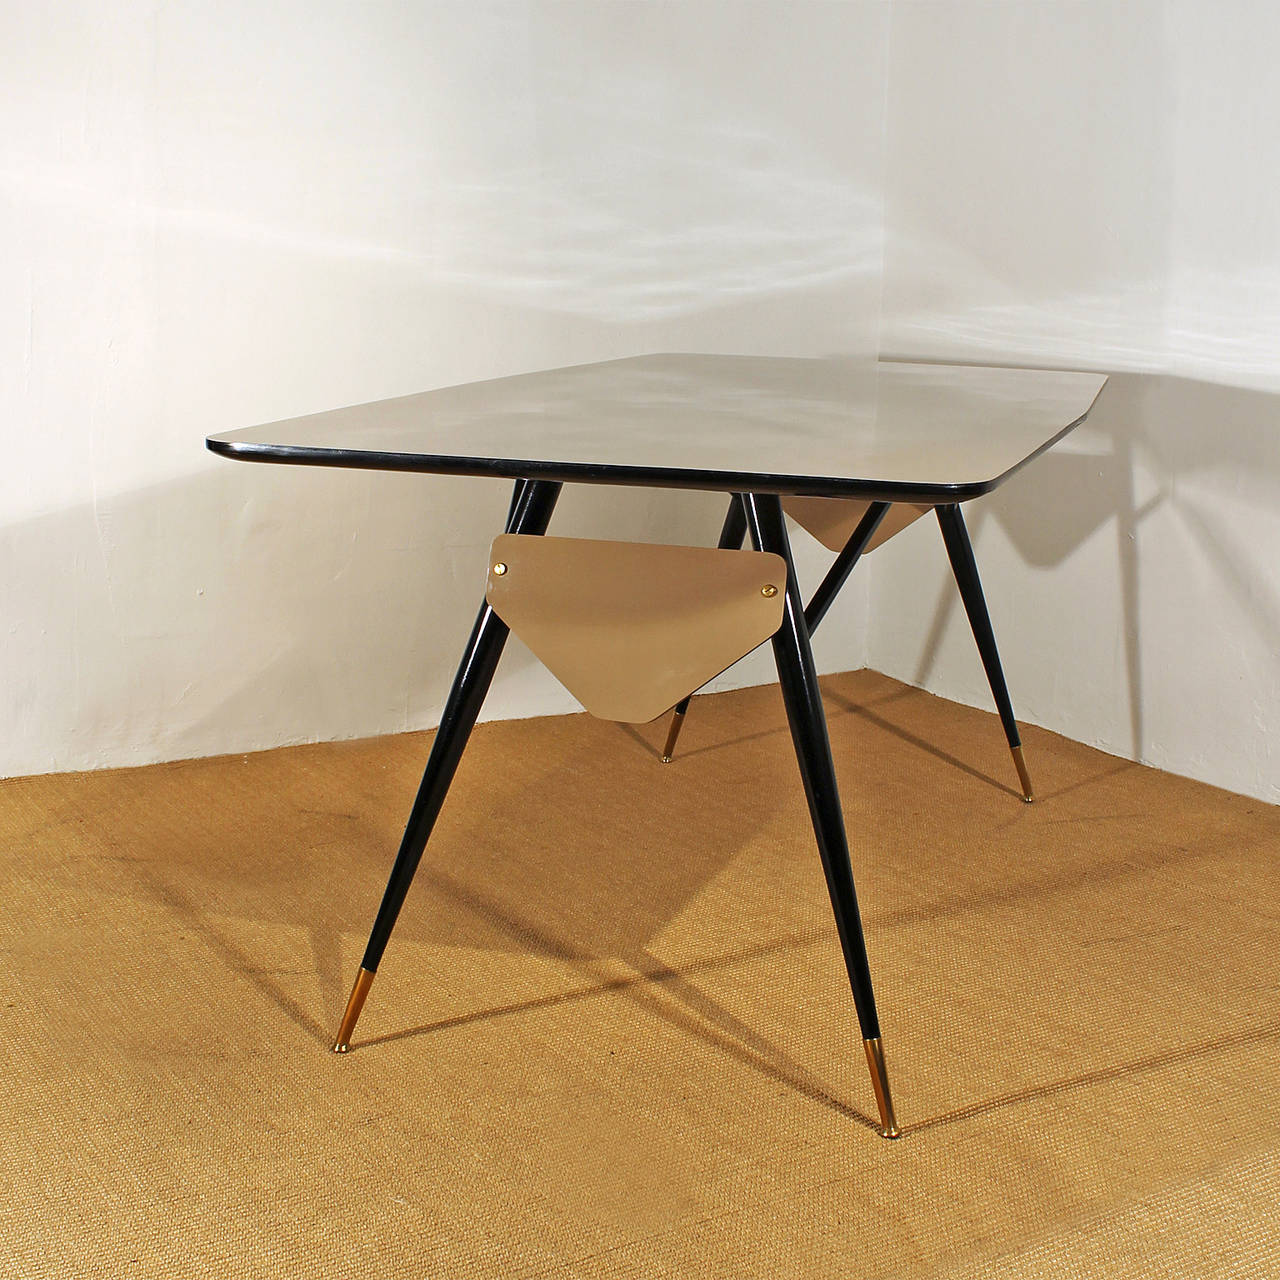 Italian 1950s Dining room table, metal, brass and formica - Italy